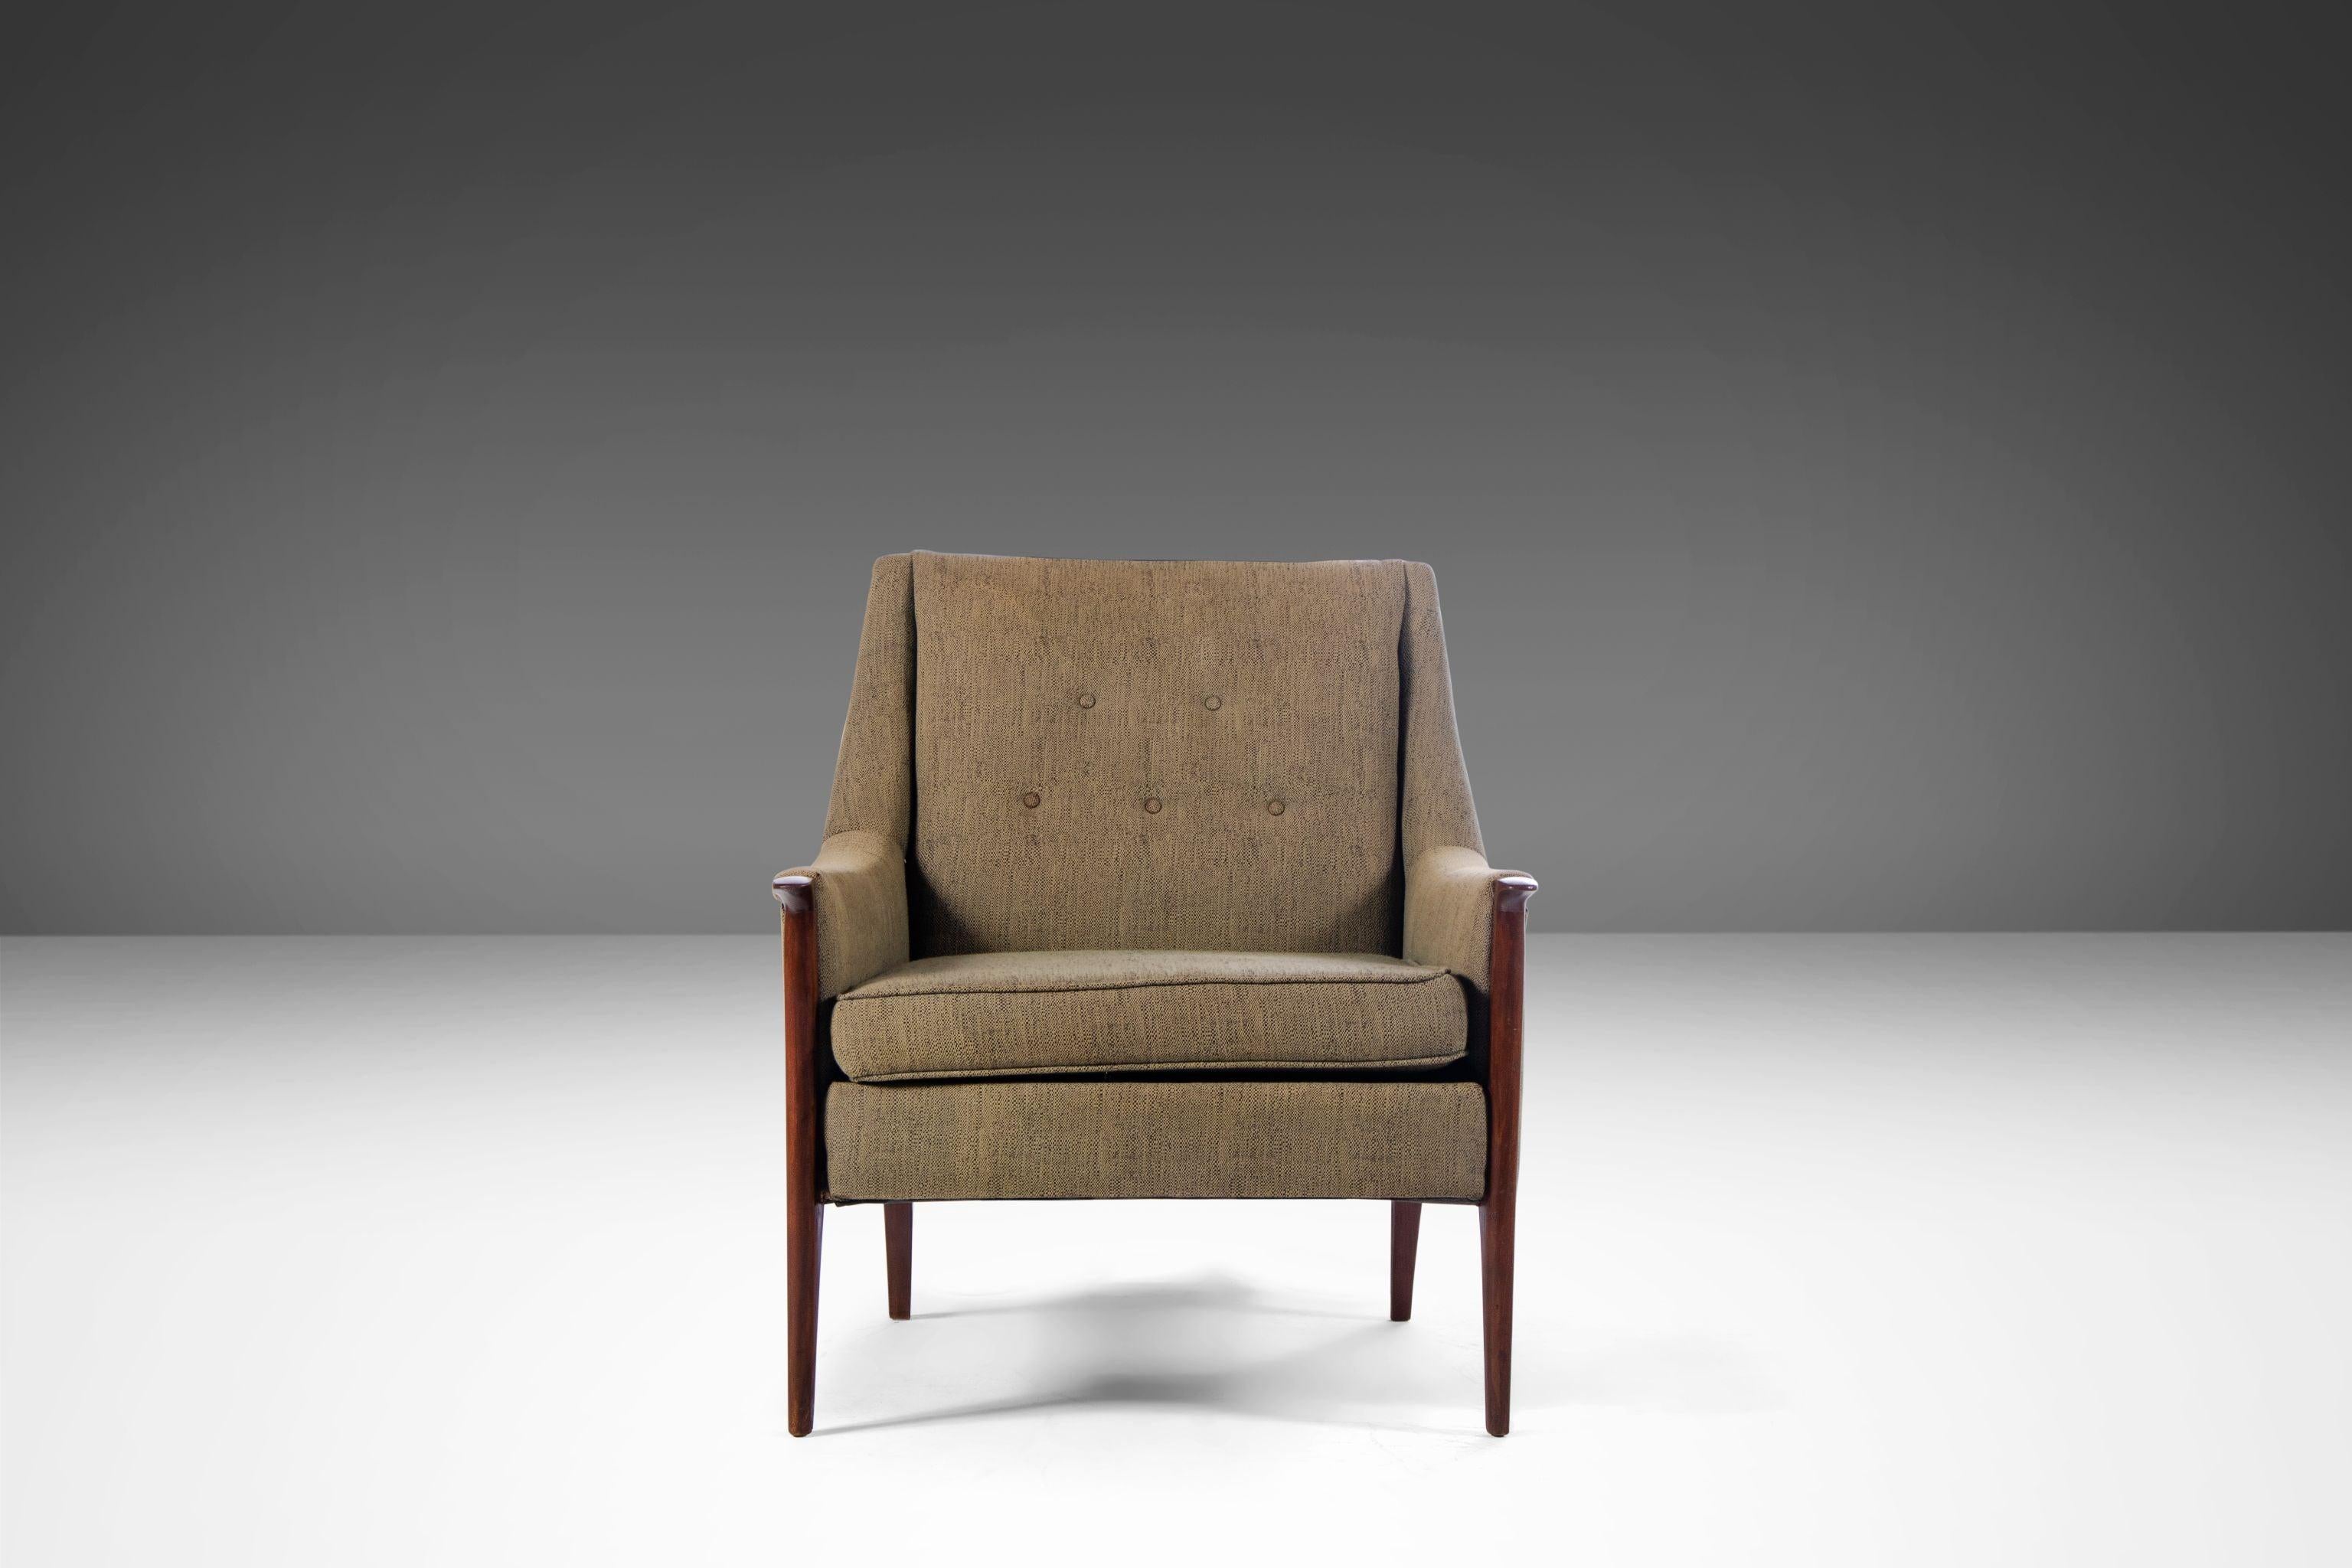 American Mid Century Modern Lounge Chair After Paul McCobb in Original Fabric, c. 1950s